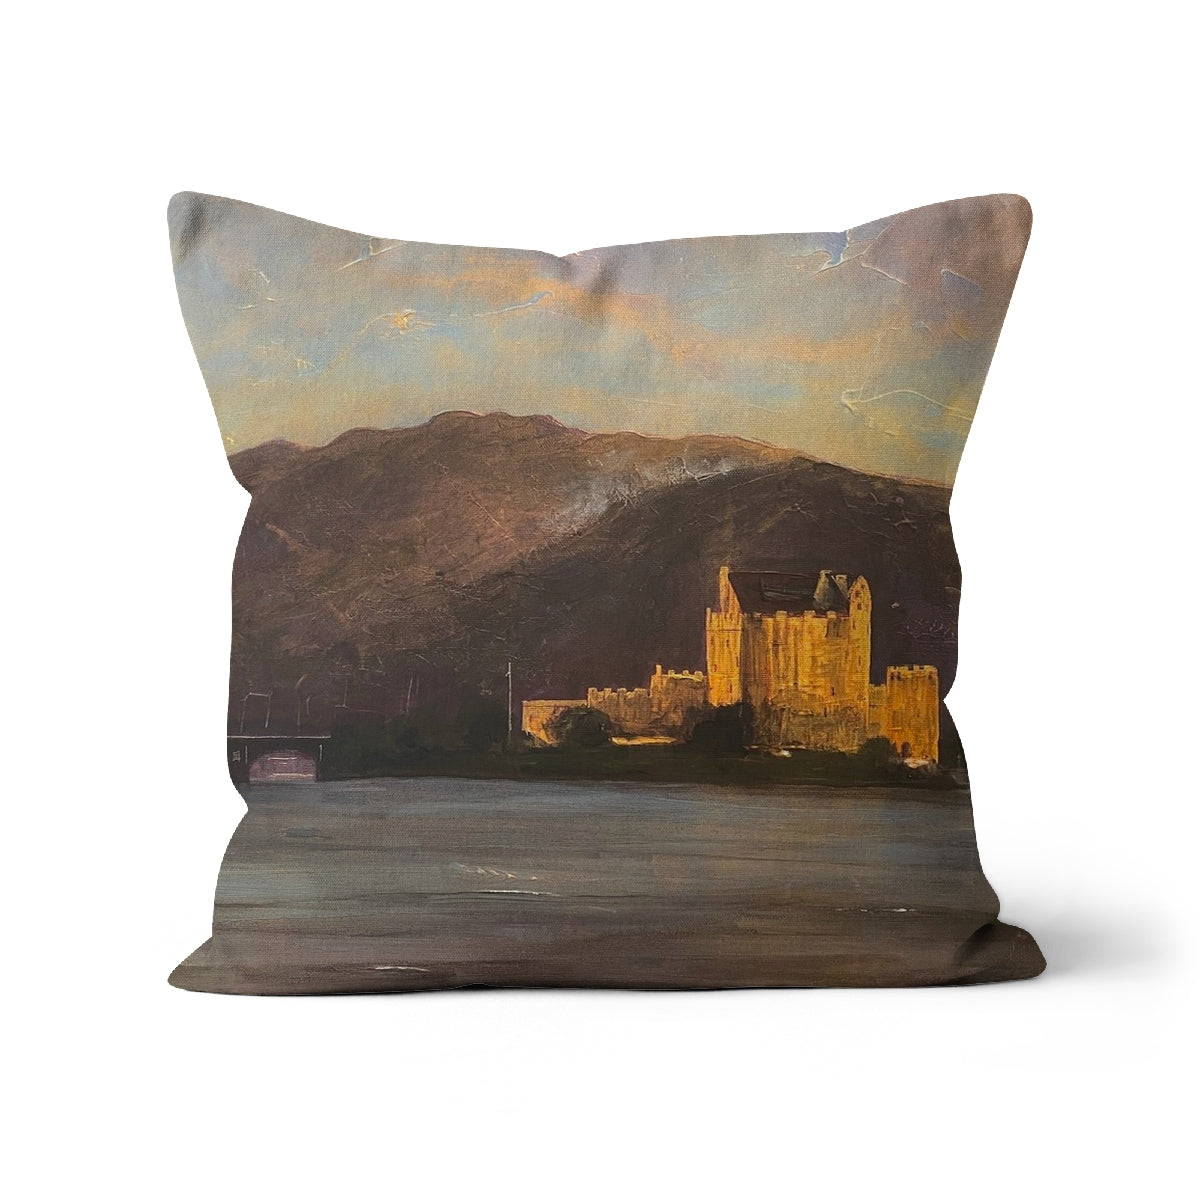 Eilean Donan Castle Art Gifts Cushion-Cushions-Historic & Iconic Scotland Art Gallery-Linen-12"x12"-Paintings, Prints, Homeware, Art Gifts From Scotland By Scottish Artist Kevin Hunter